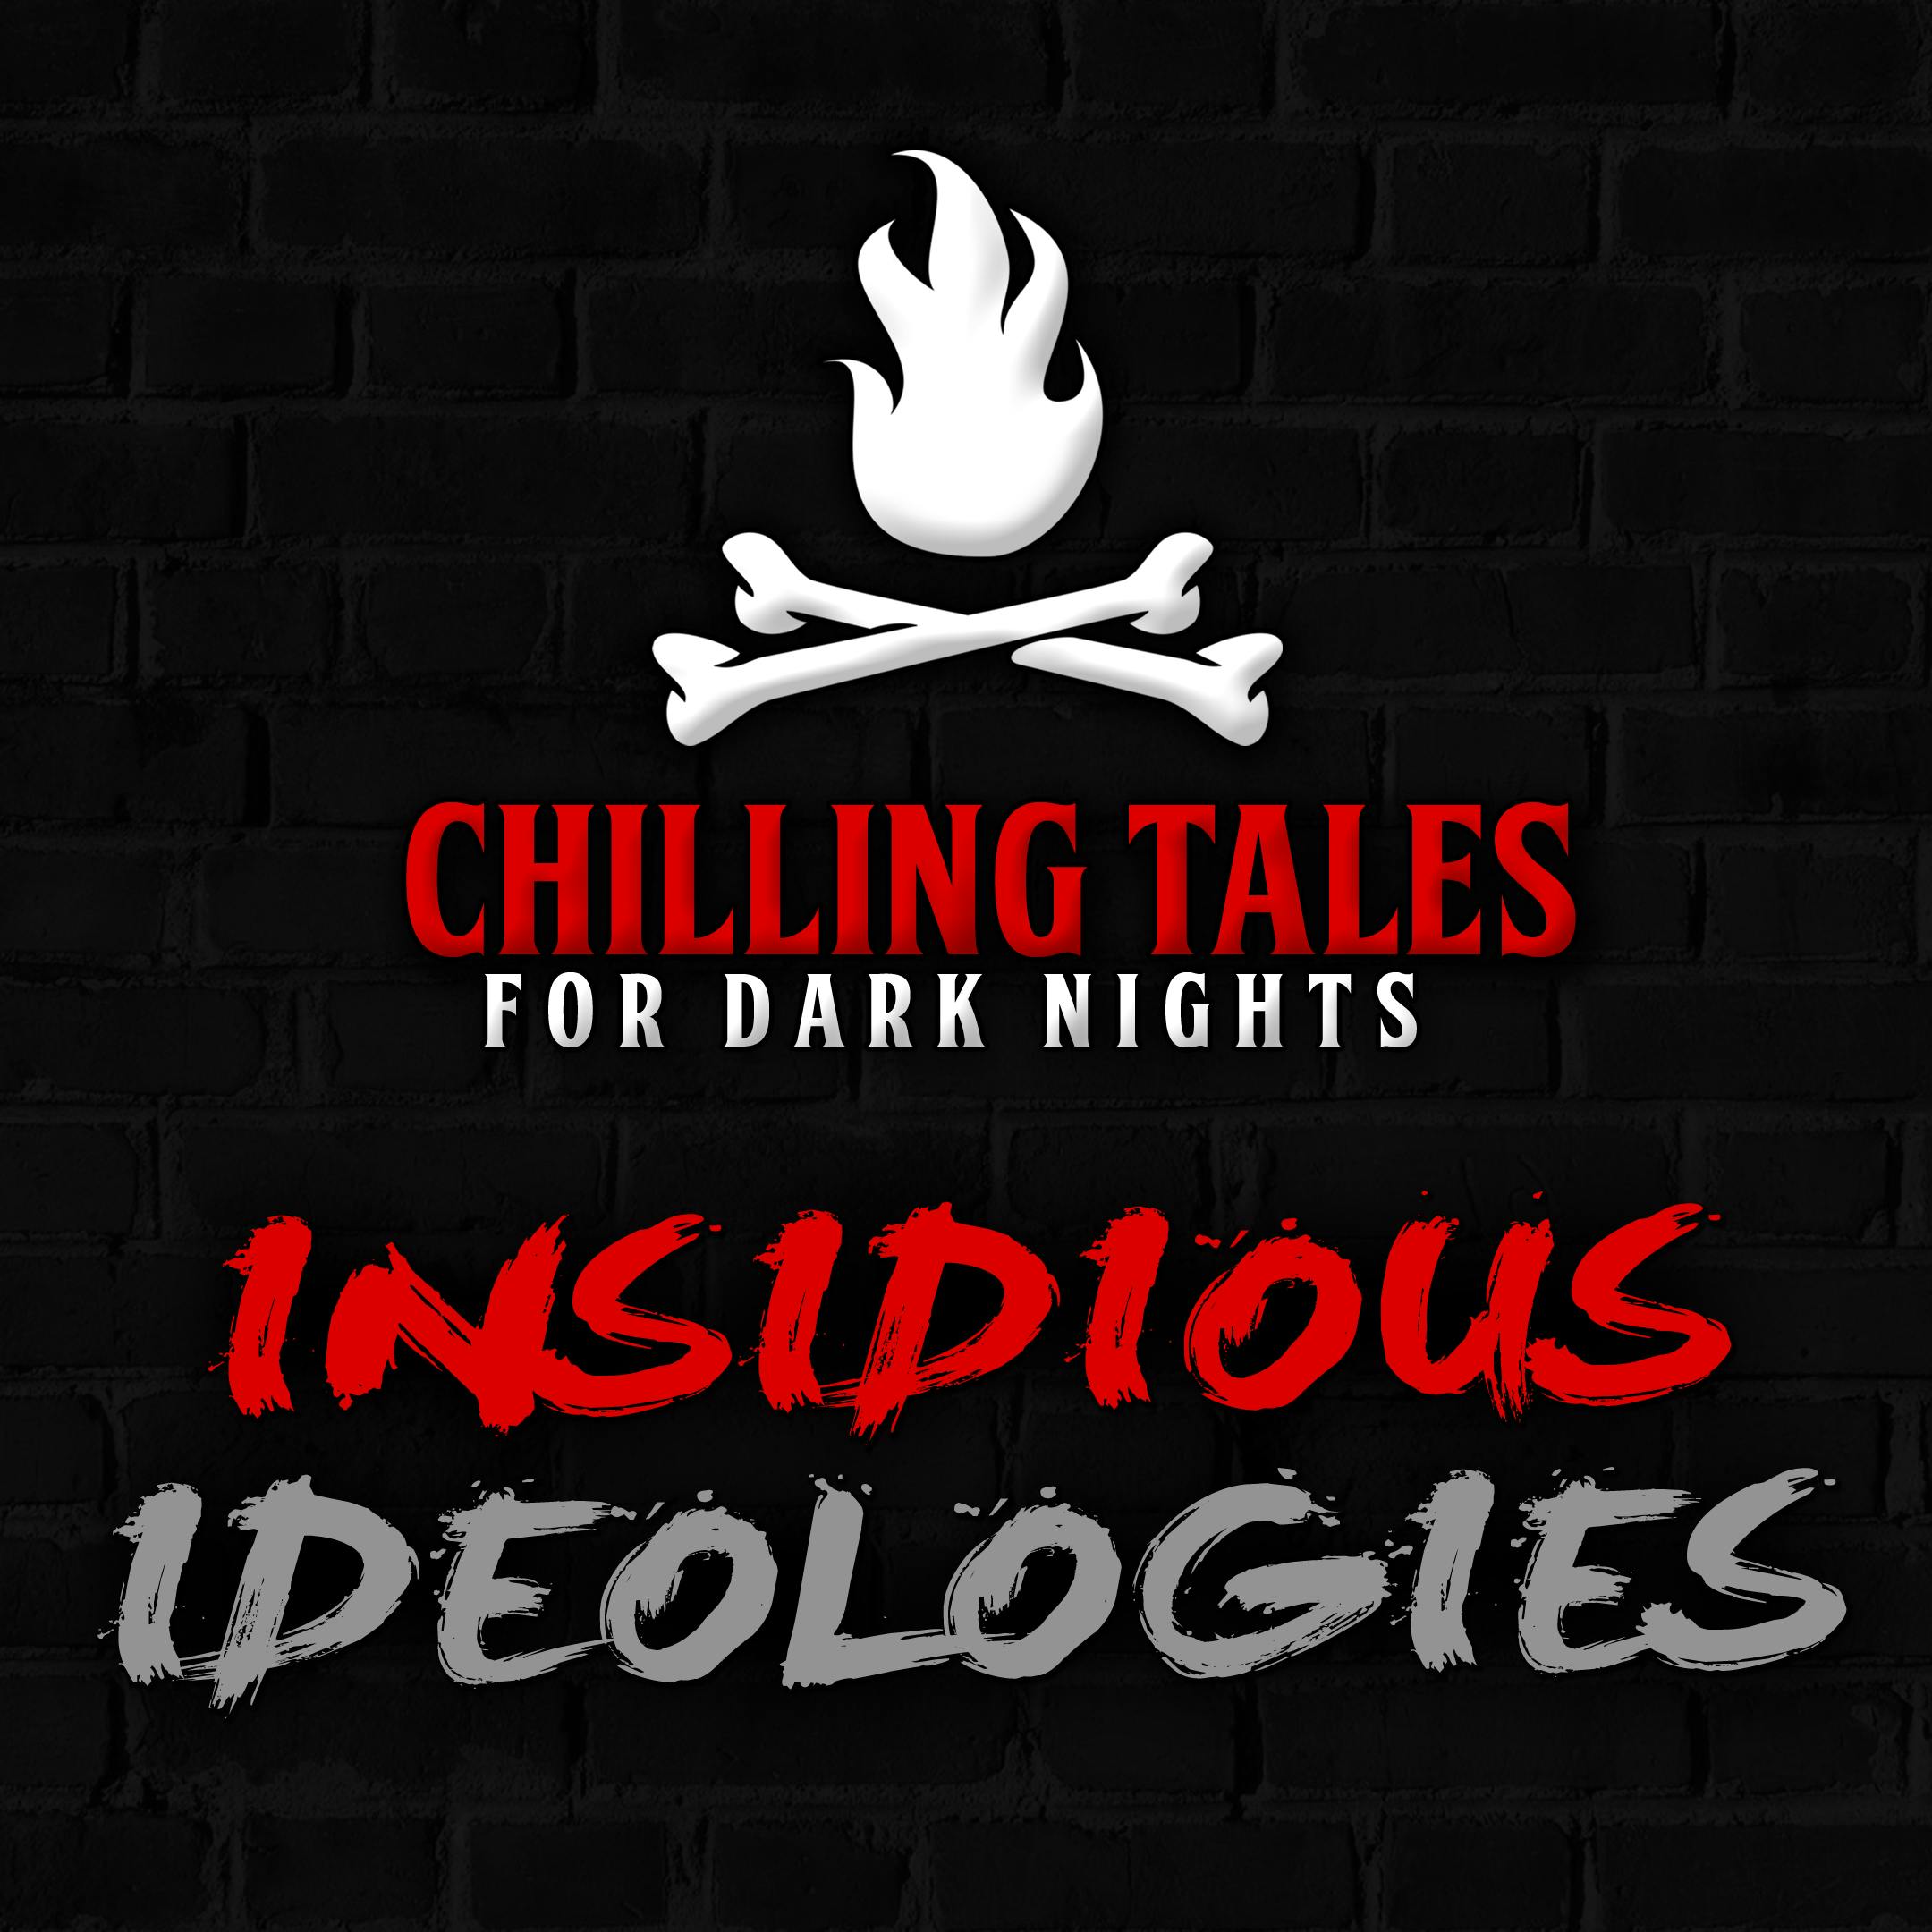 82: Insidious Ideologies – Chilling Tales for Dark Nights